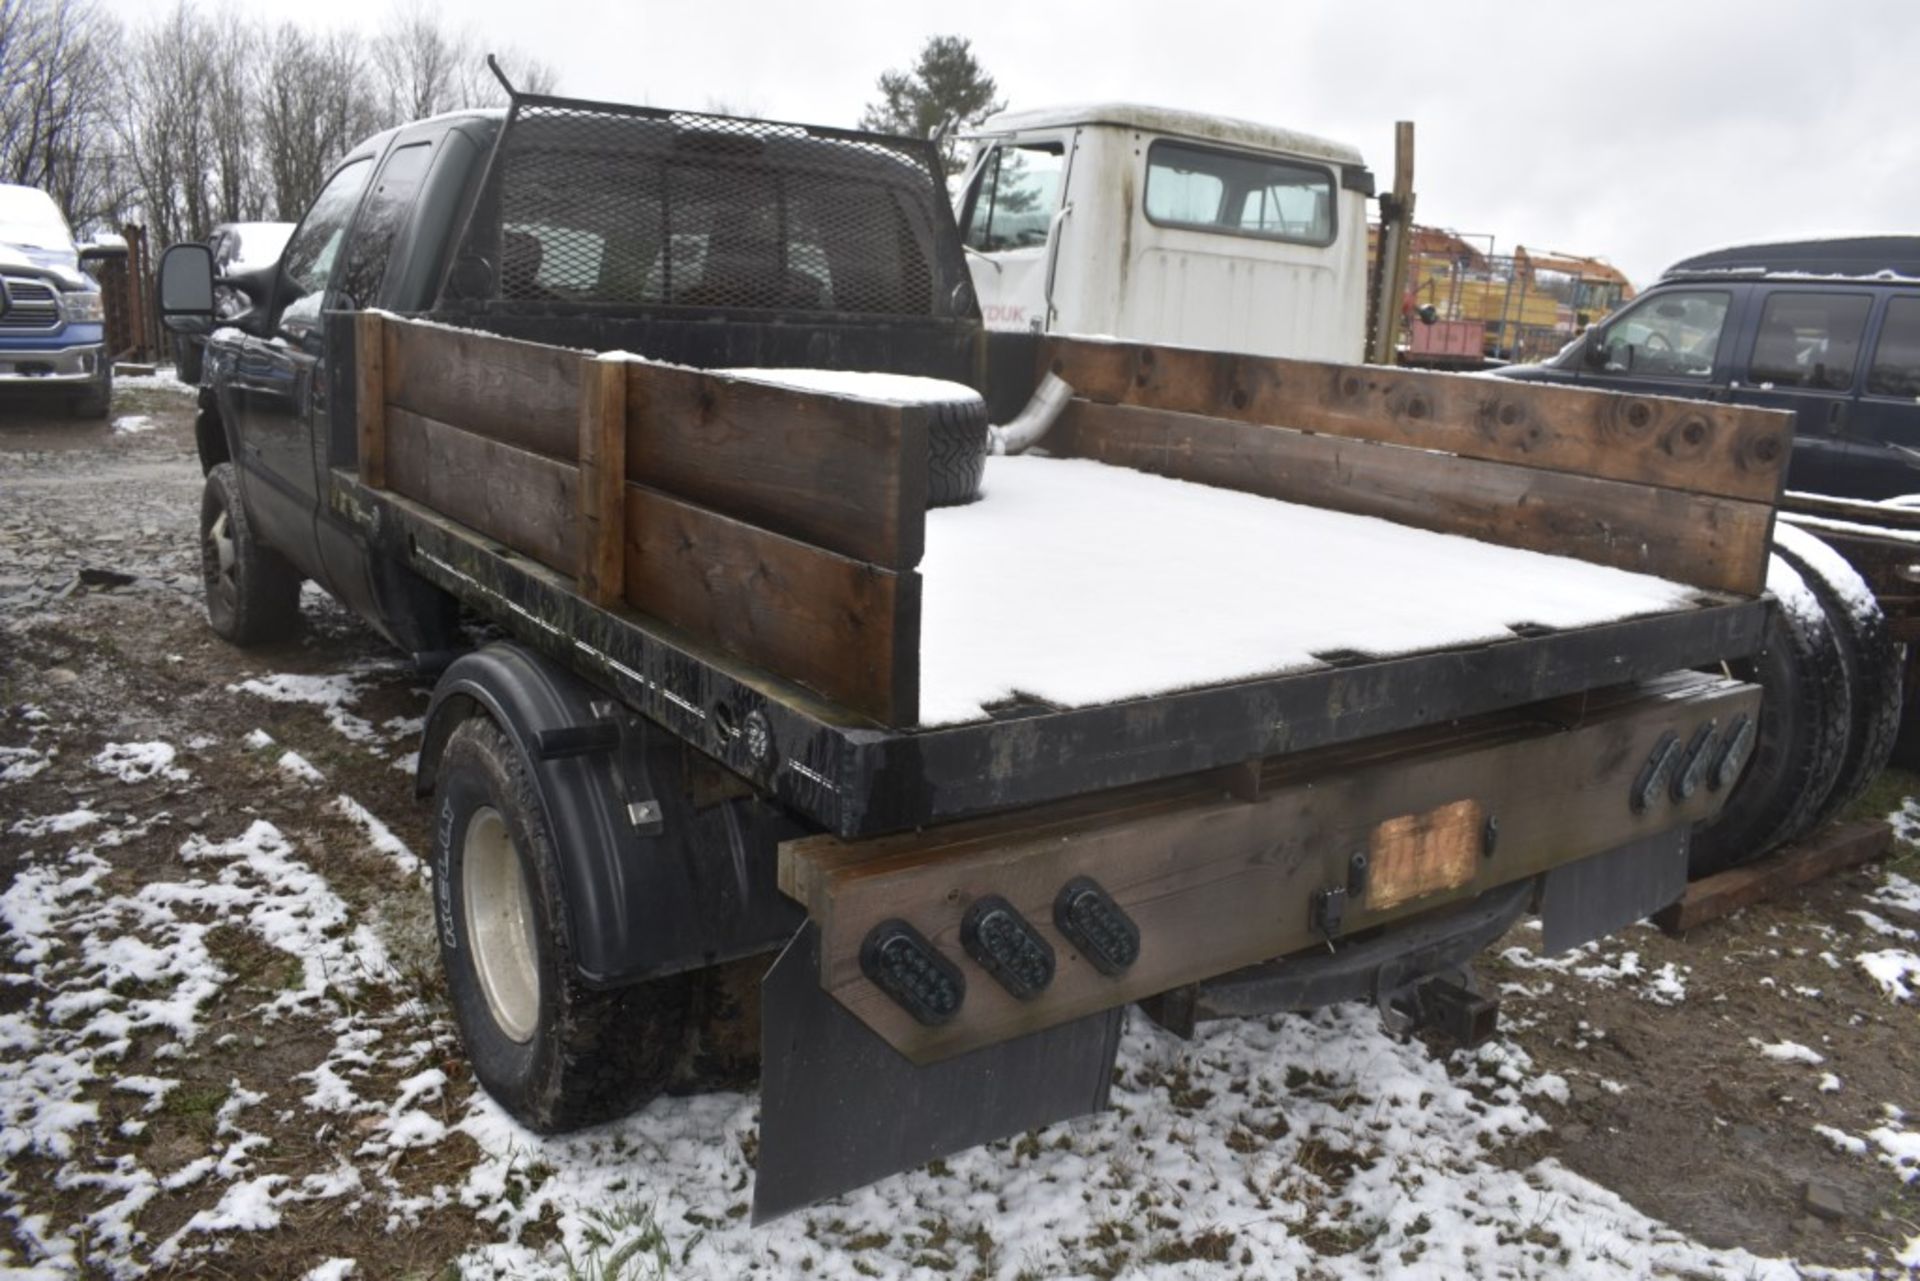 2002 Ford F-350 Super Duty Stake Body Truck - Image 8 of 36